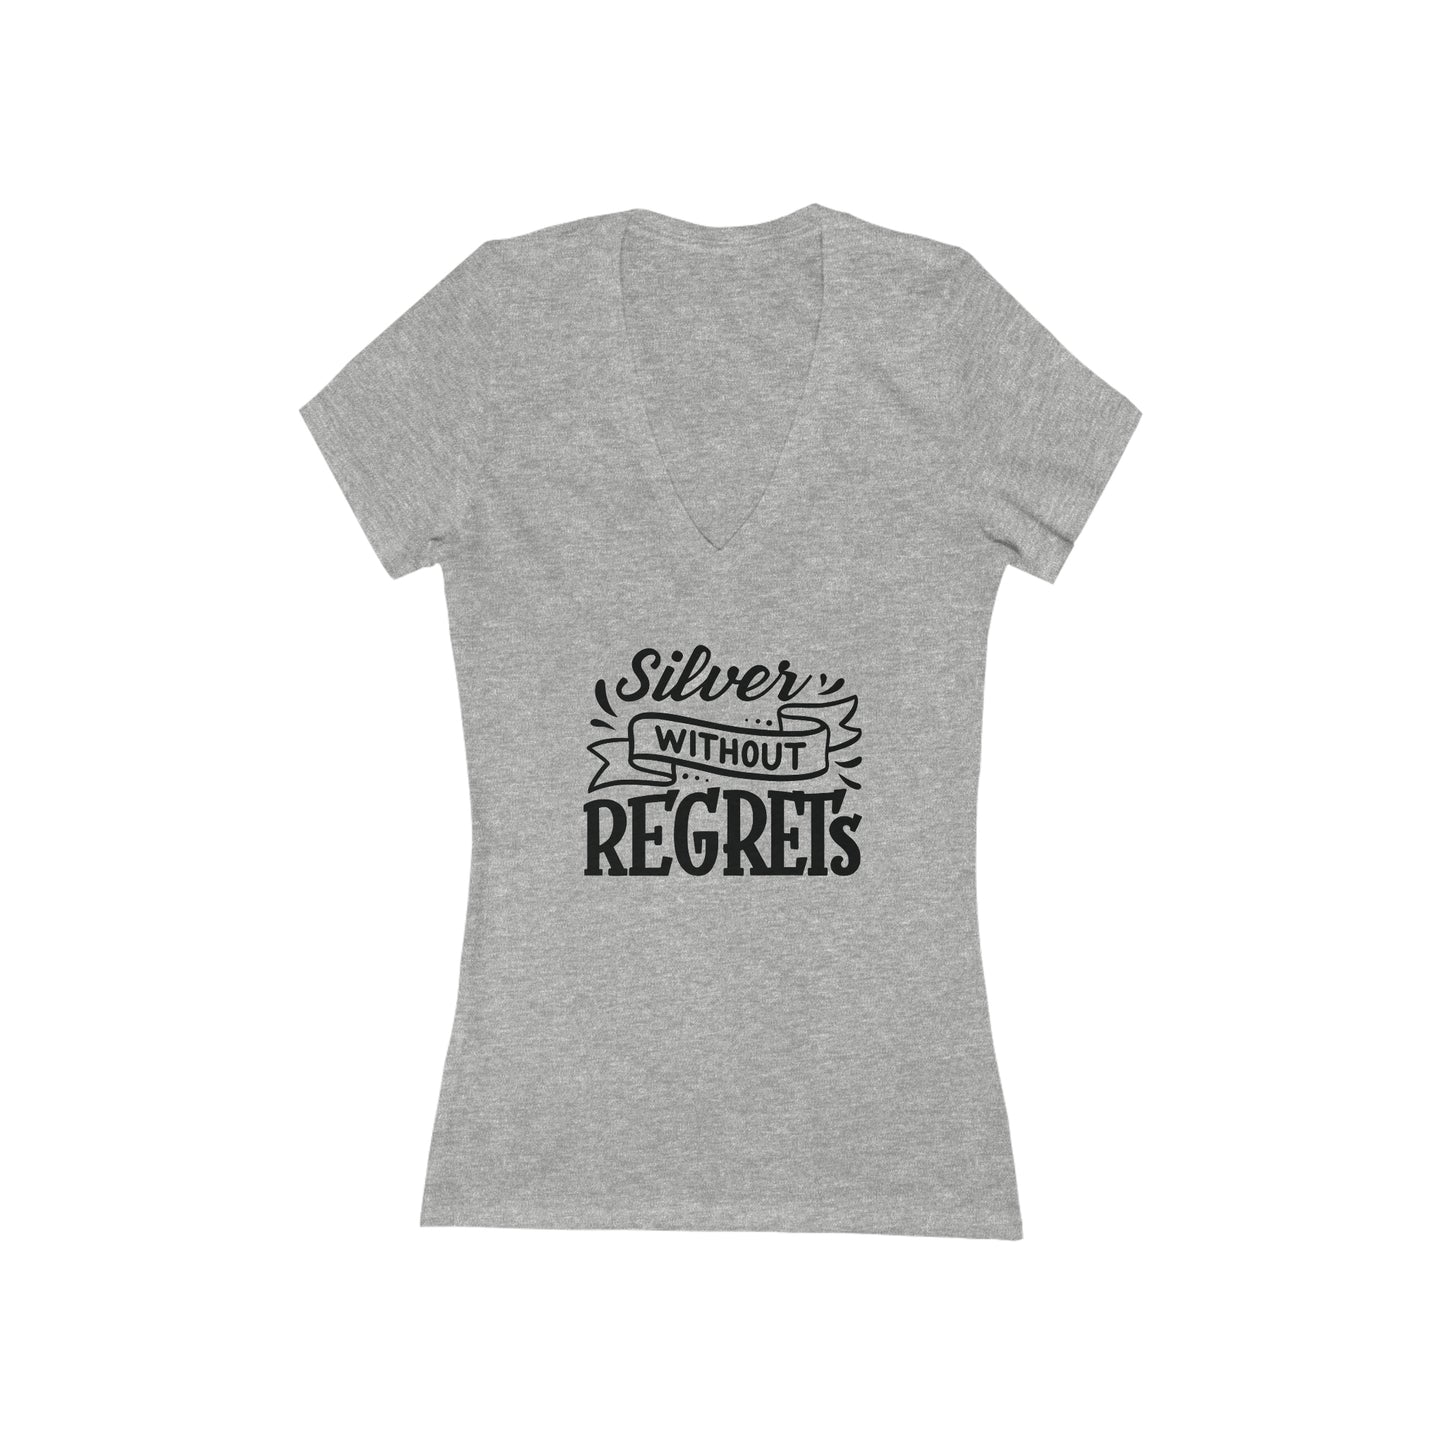 SILVER Without Regrets, short sleeve deep v-neck t-shirt, for women embracing silver and gray hair